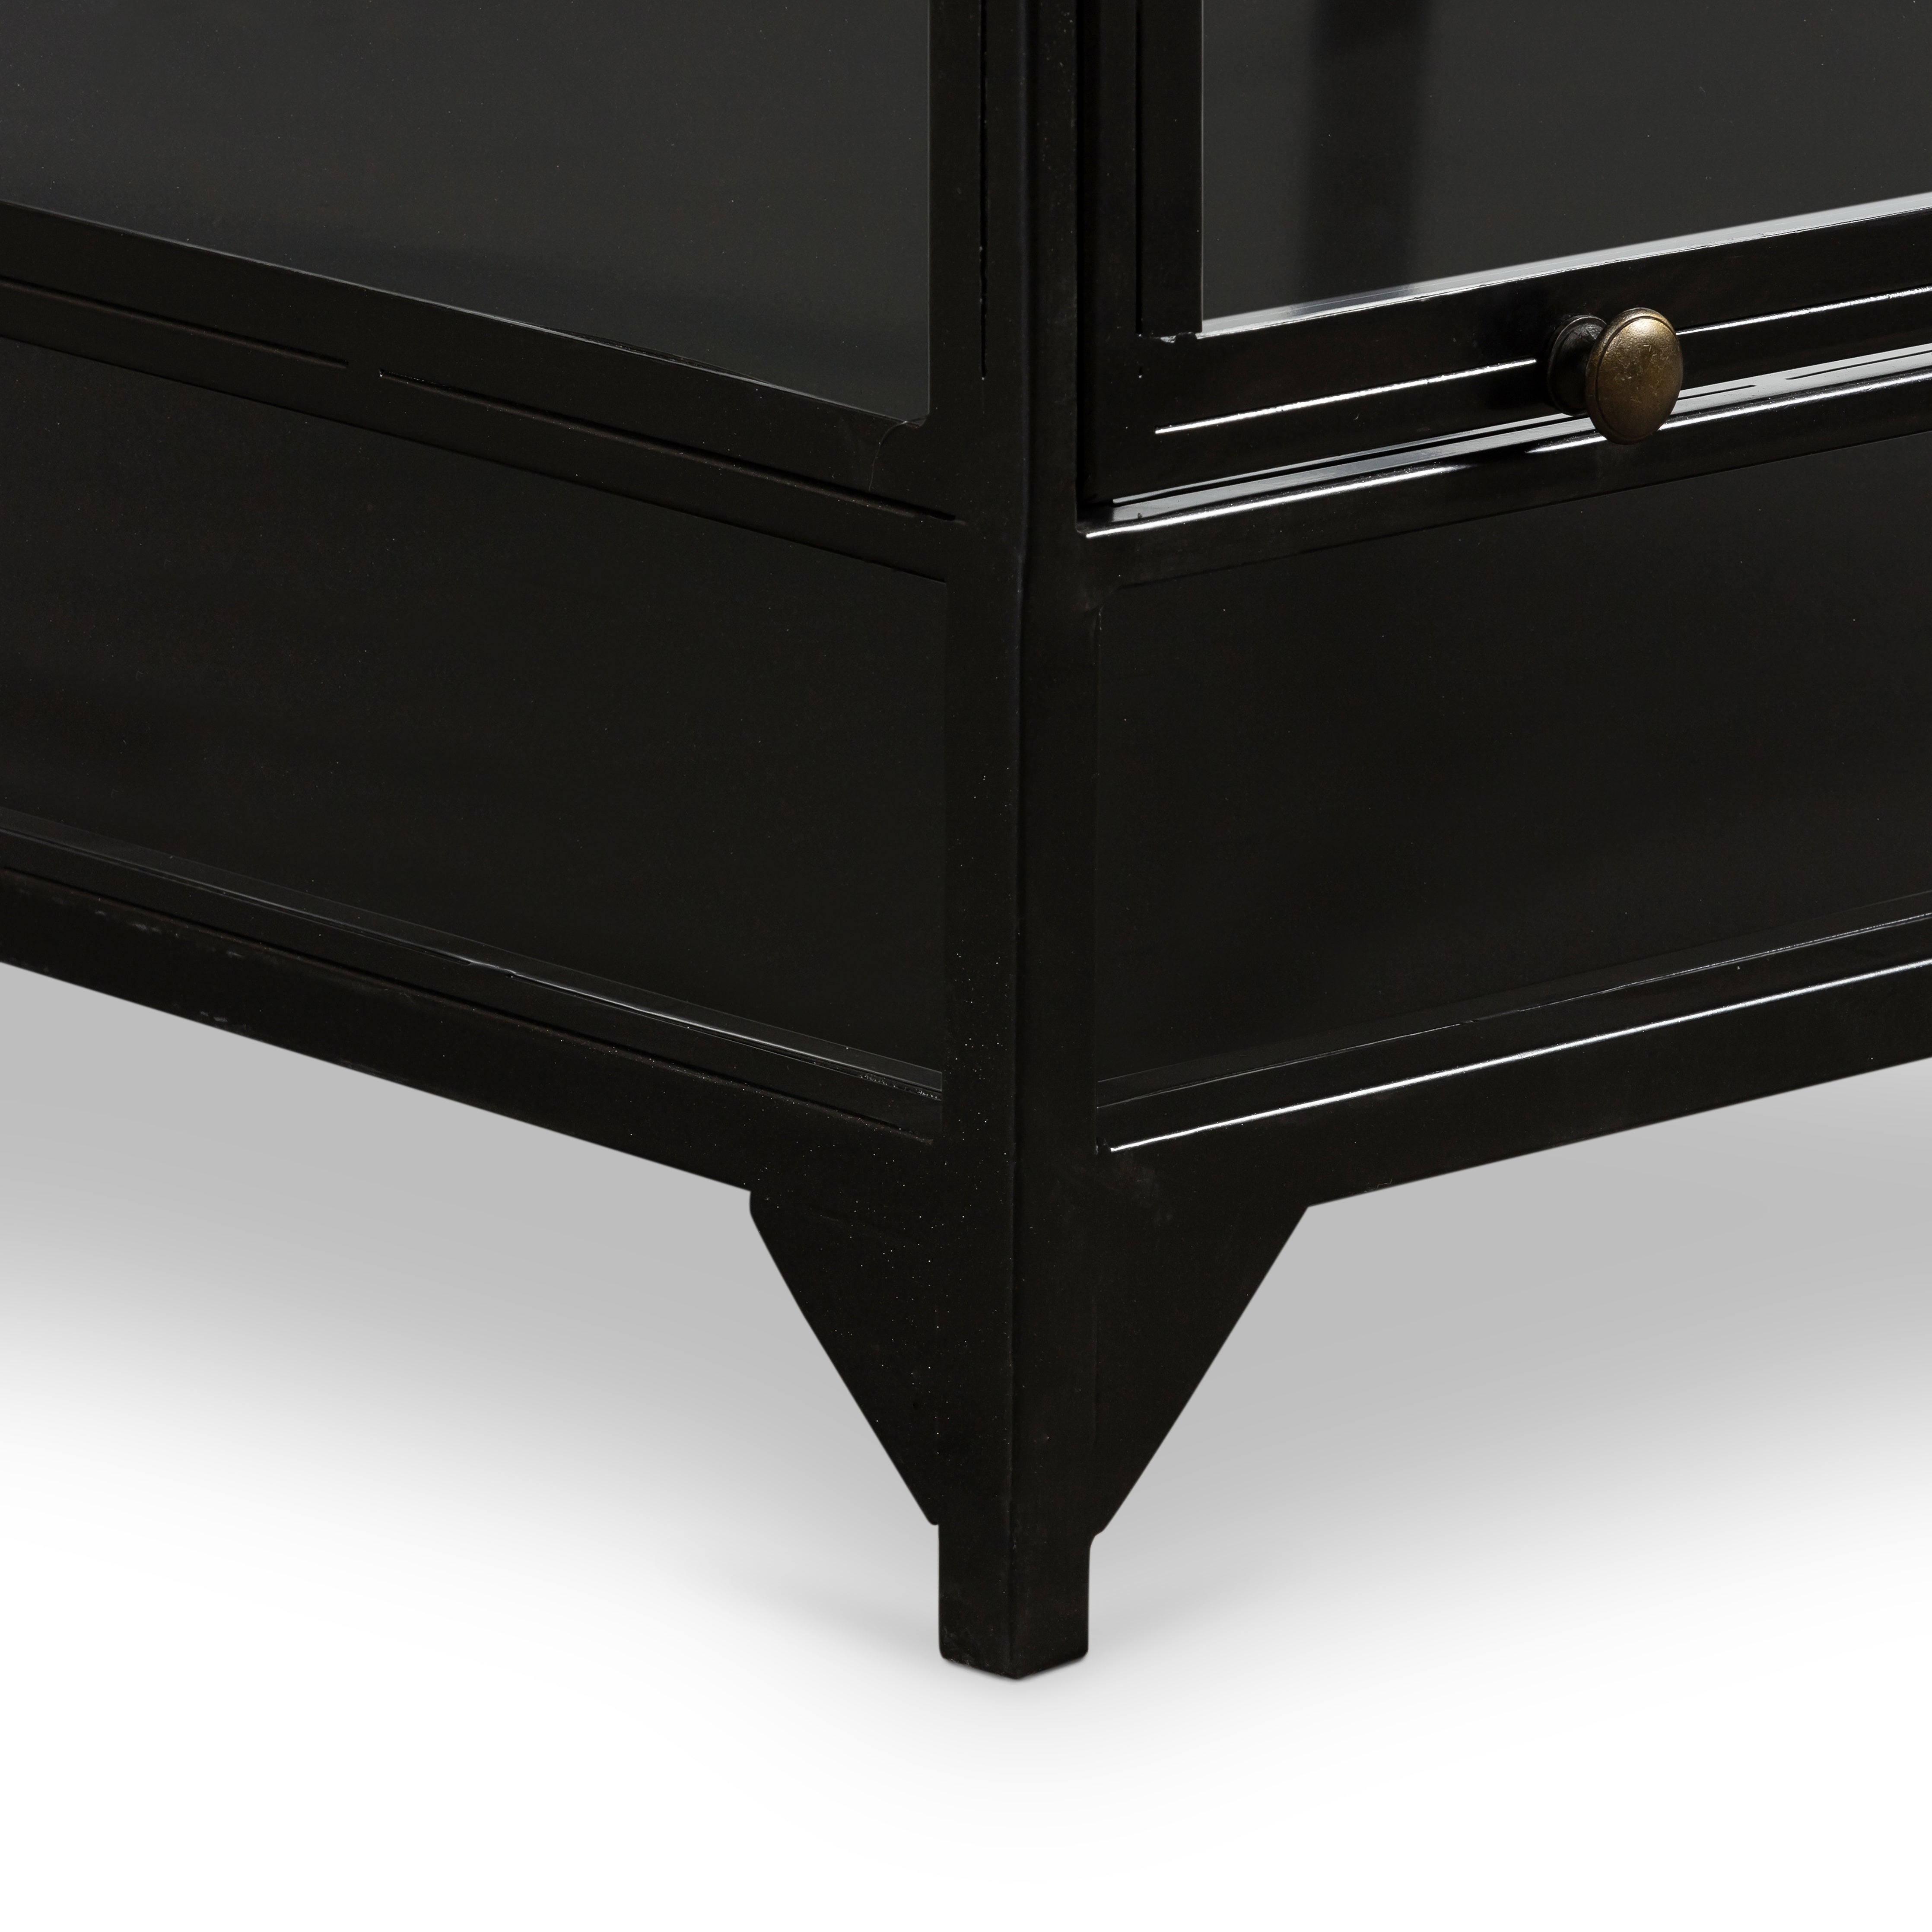 Black Iron with Tempered Glass | Shadow Box Coffee Table | Valley Ridge Furniture